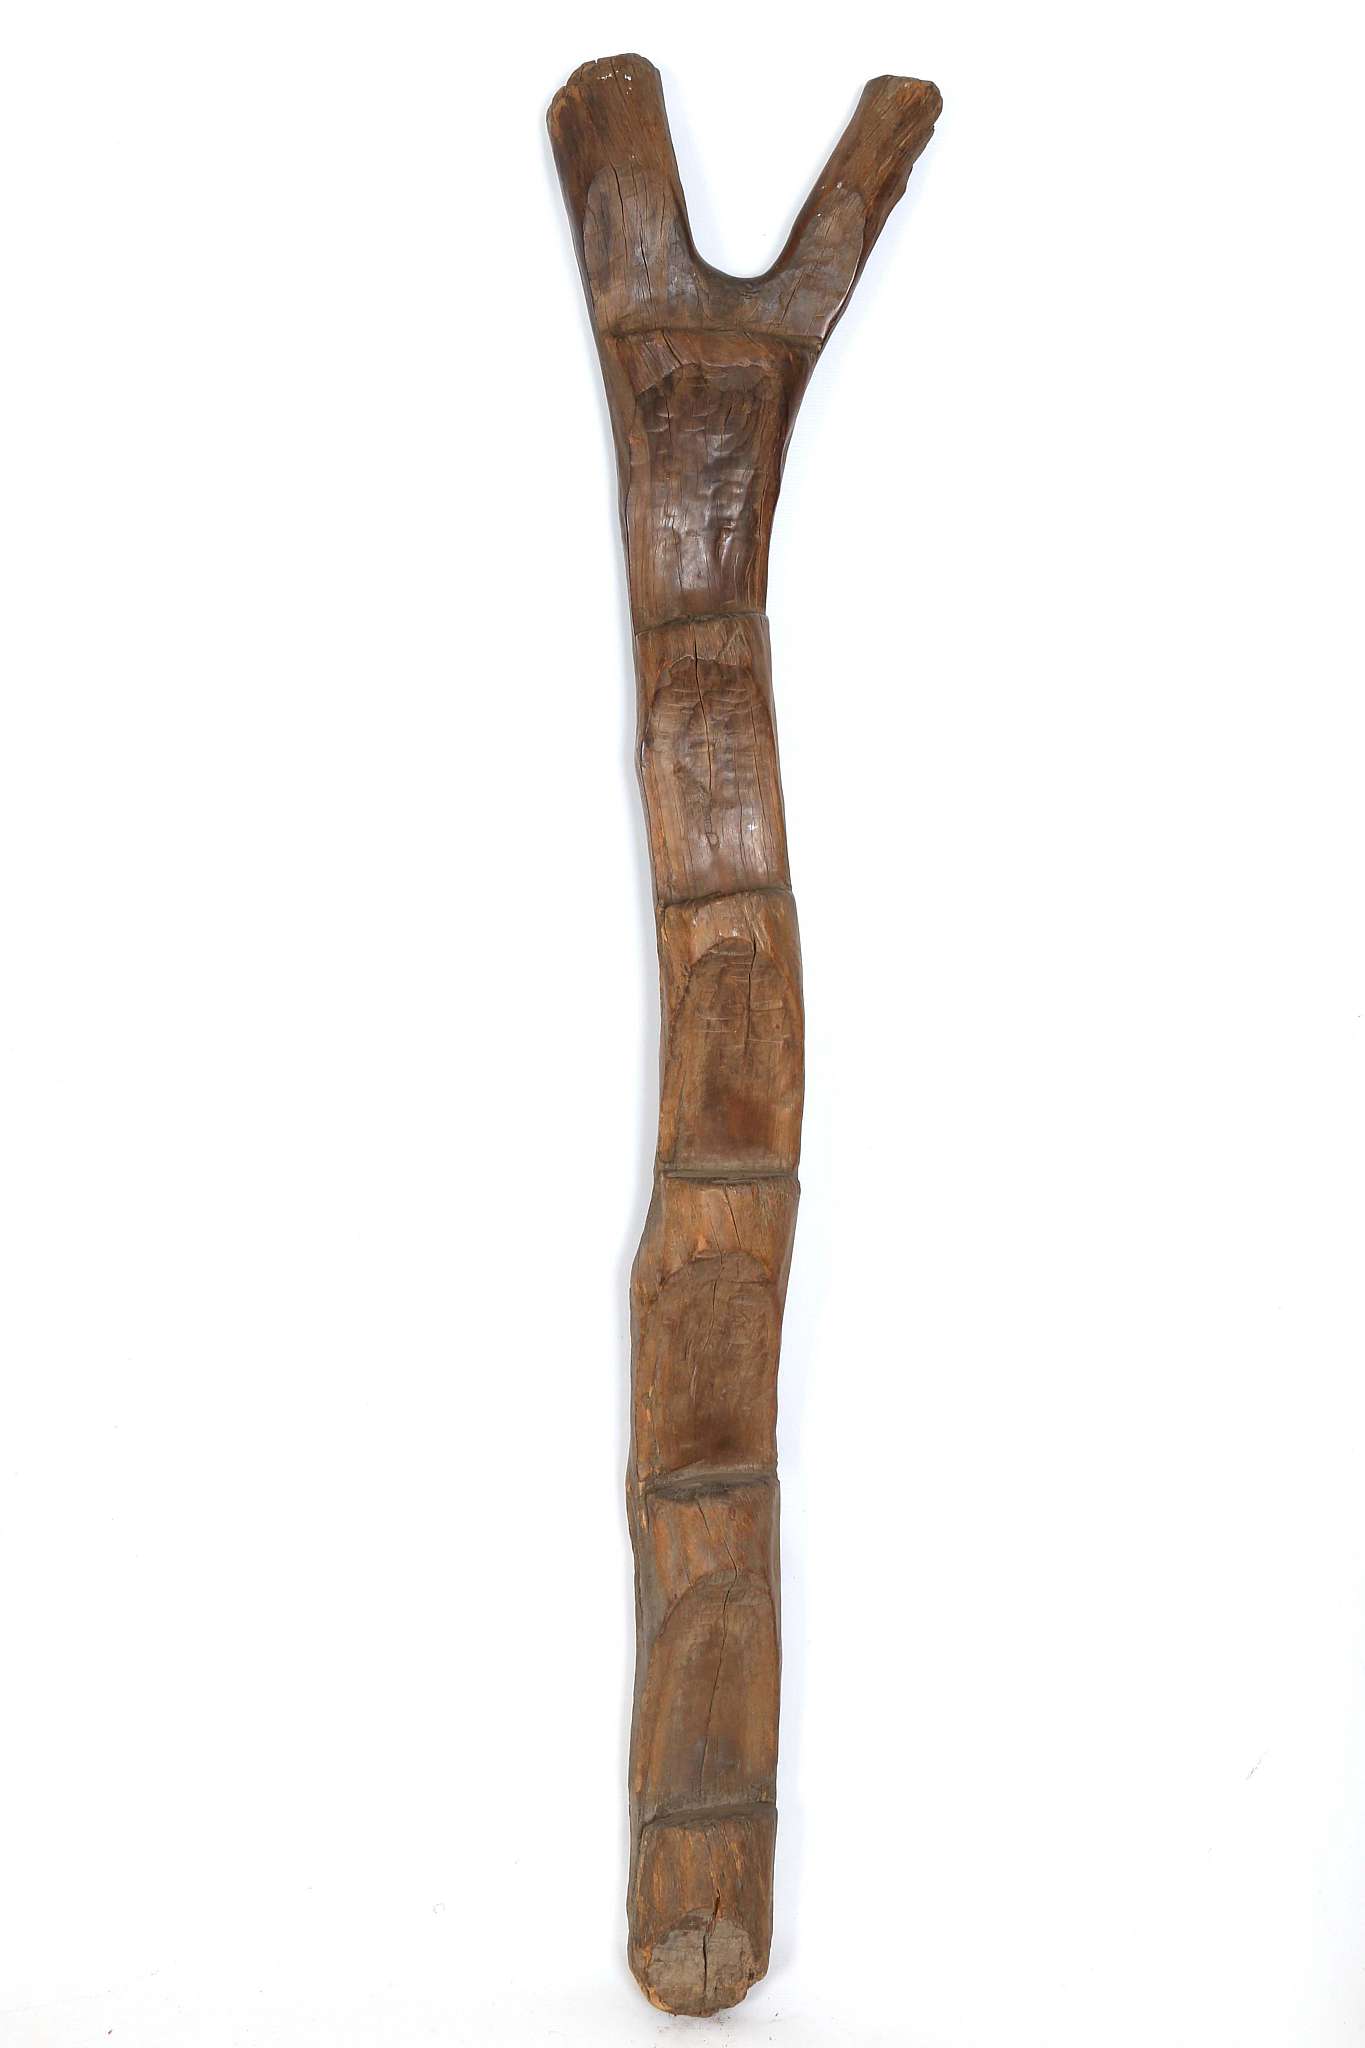 A DOGON LADDER, MALI Of typical stepped, Y-shaped form, with shiny brown patina, 163cm high